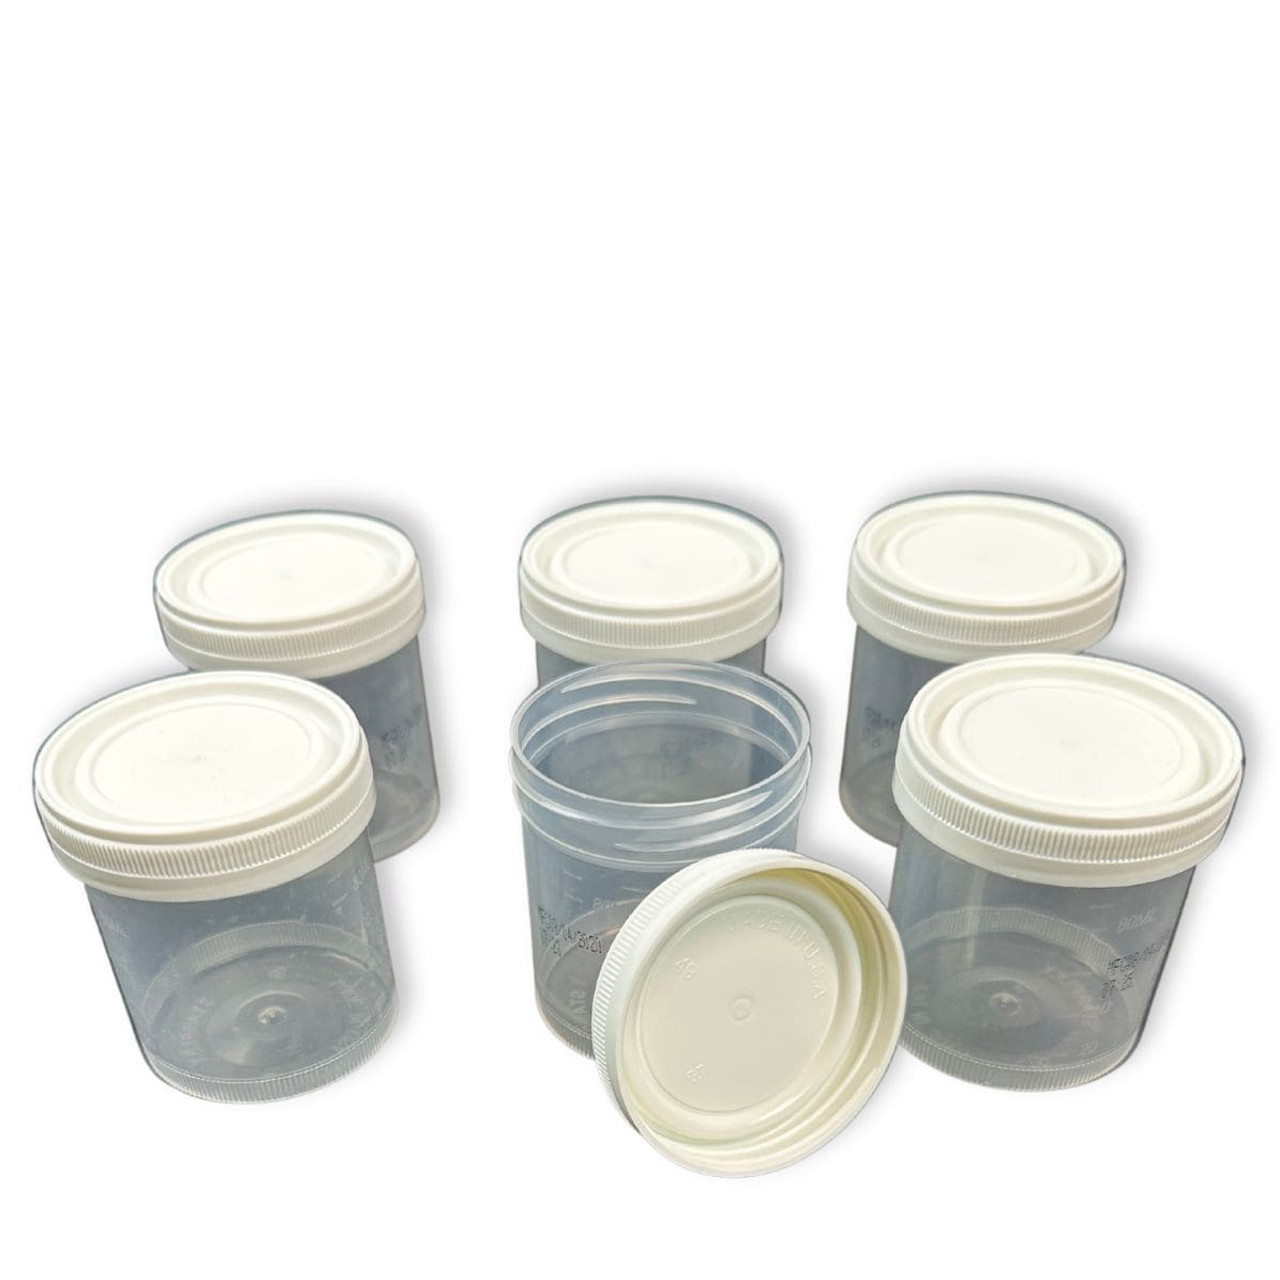 https://cdn11.bigcommerce.com/s-53r83b14/images/stencil/1280x1280/products/23528/114963/6-_Pack_Specimen_Parts_Cups_with_Leak_Proof_Screw_on_Lid-min__82440.1674248644.jpg?c=2